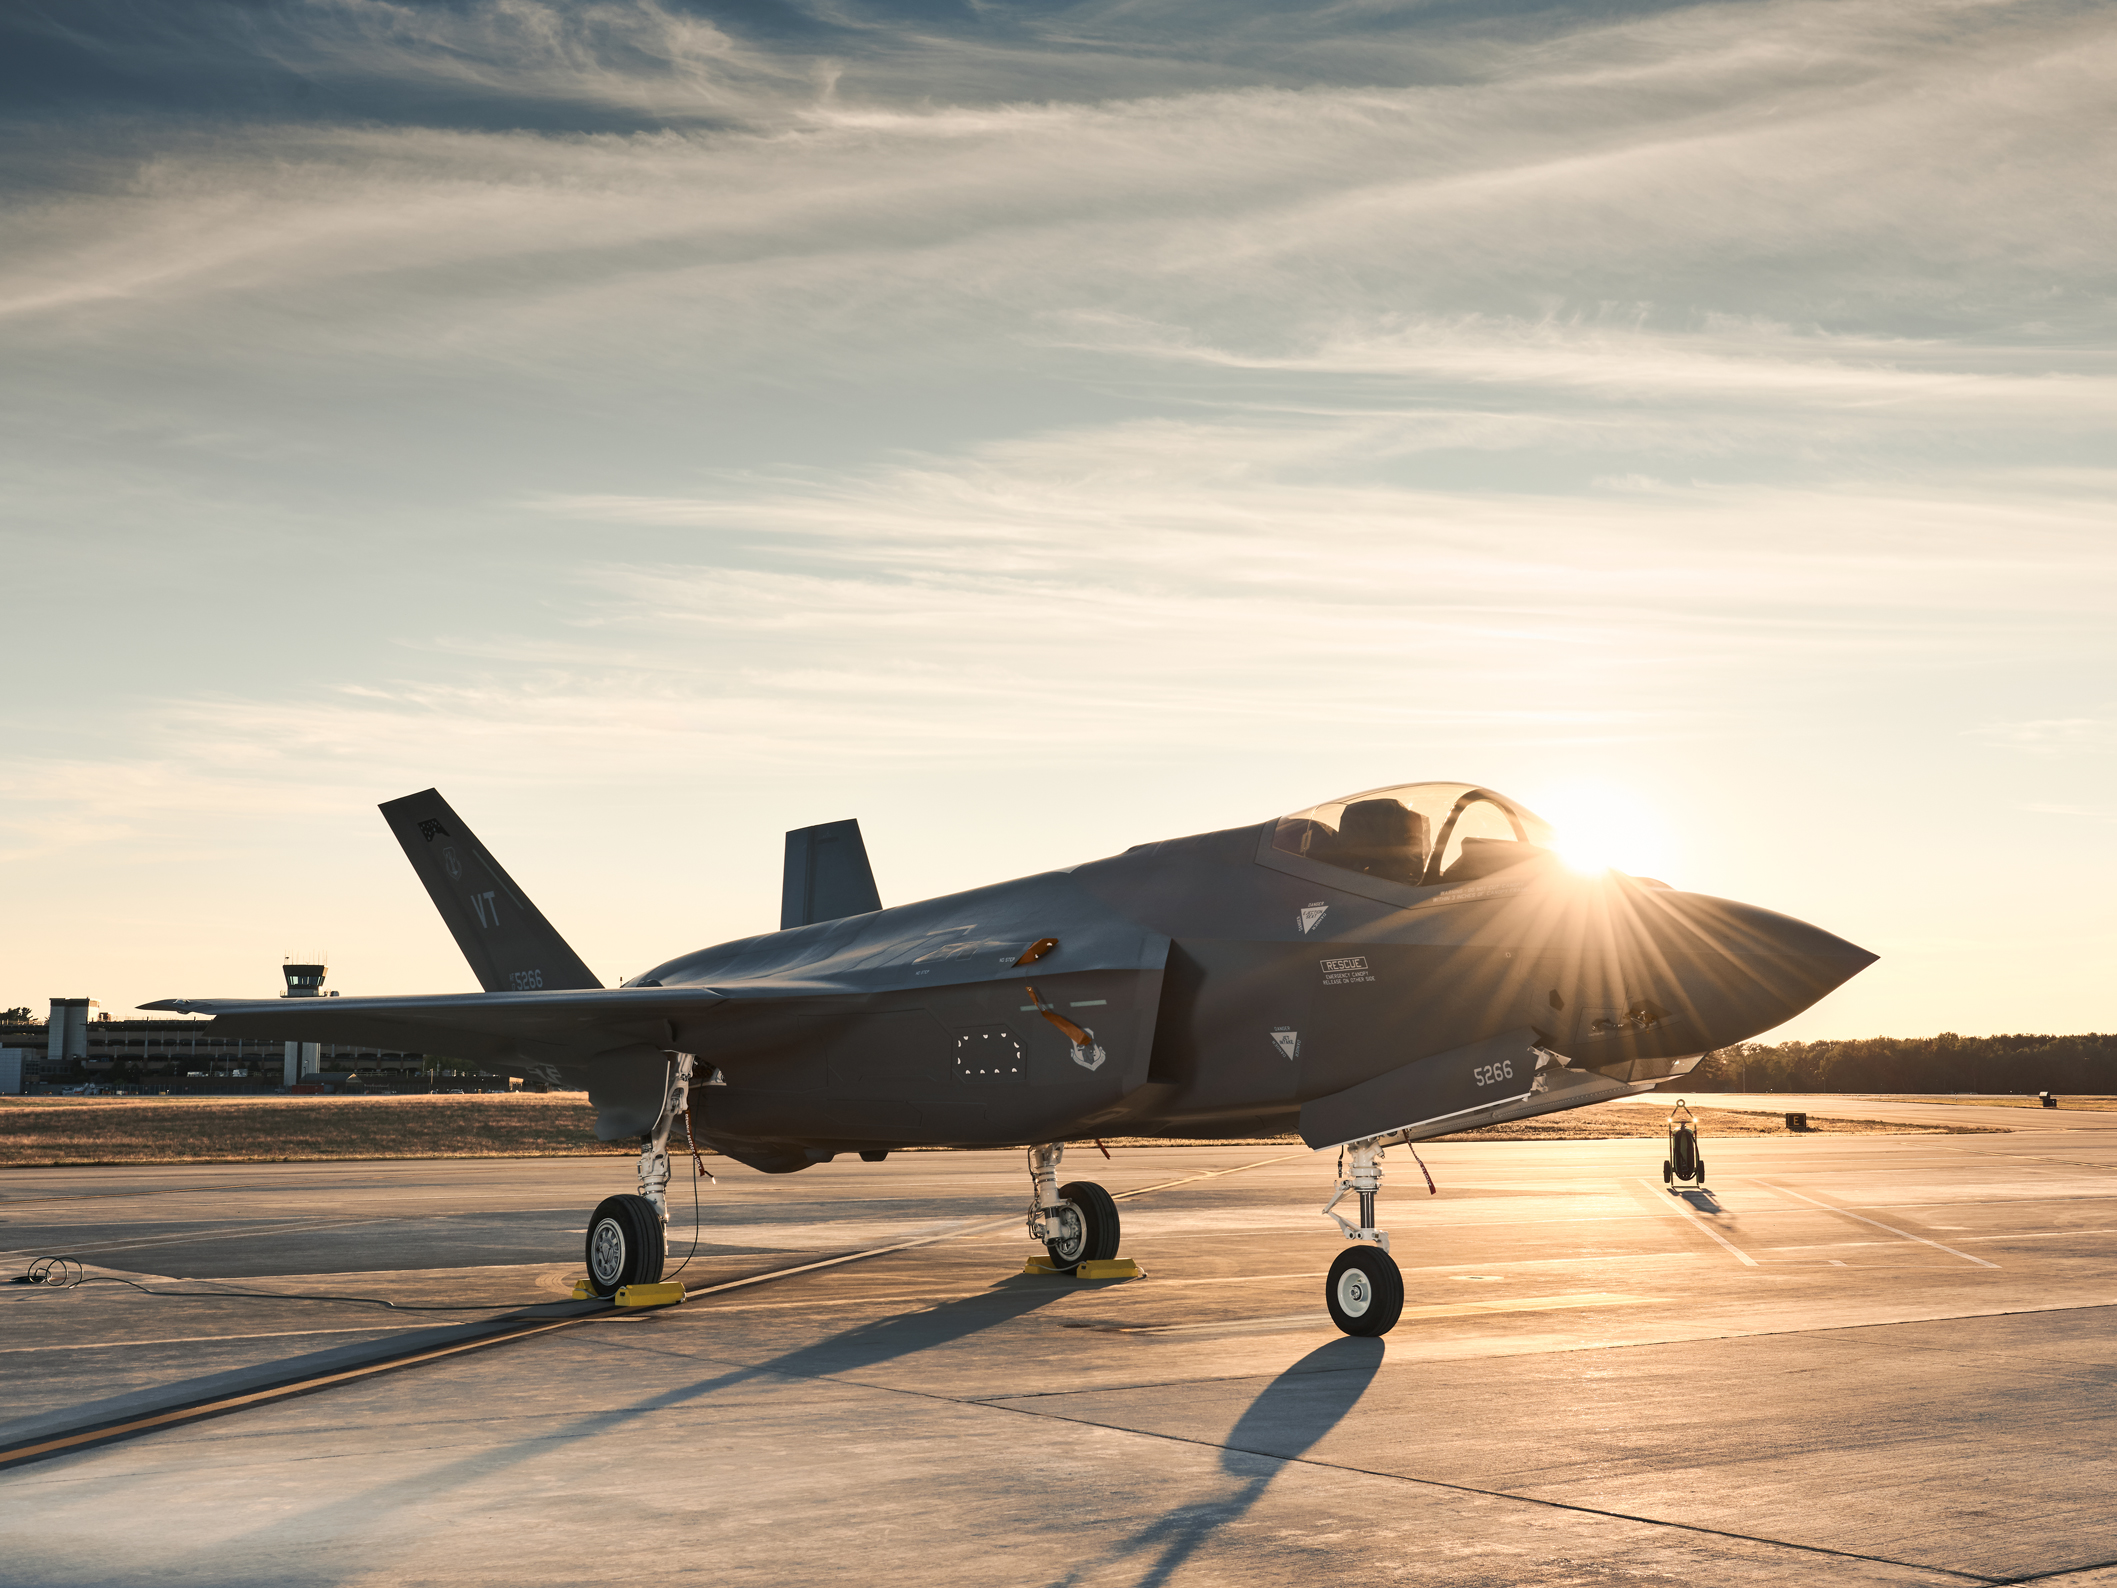 An F-35 sitting on the flight-line at sunset